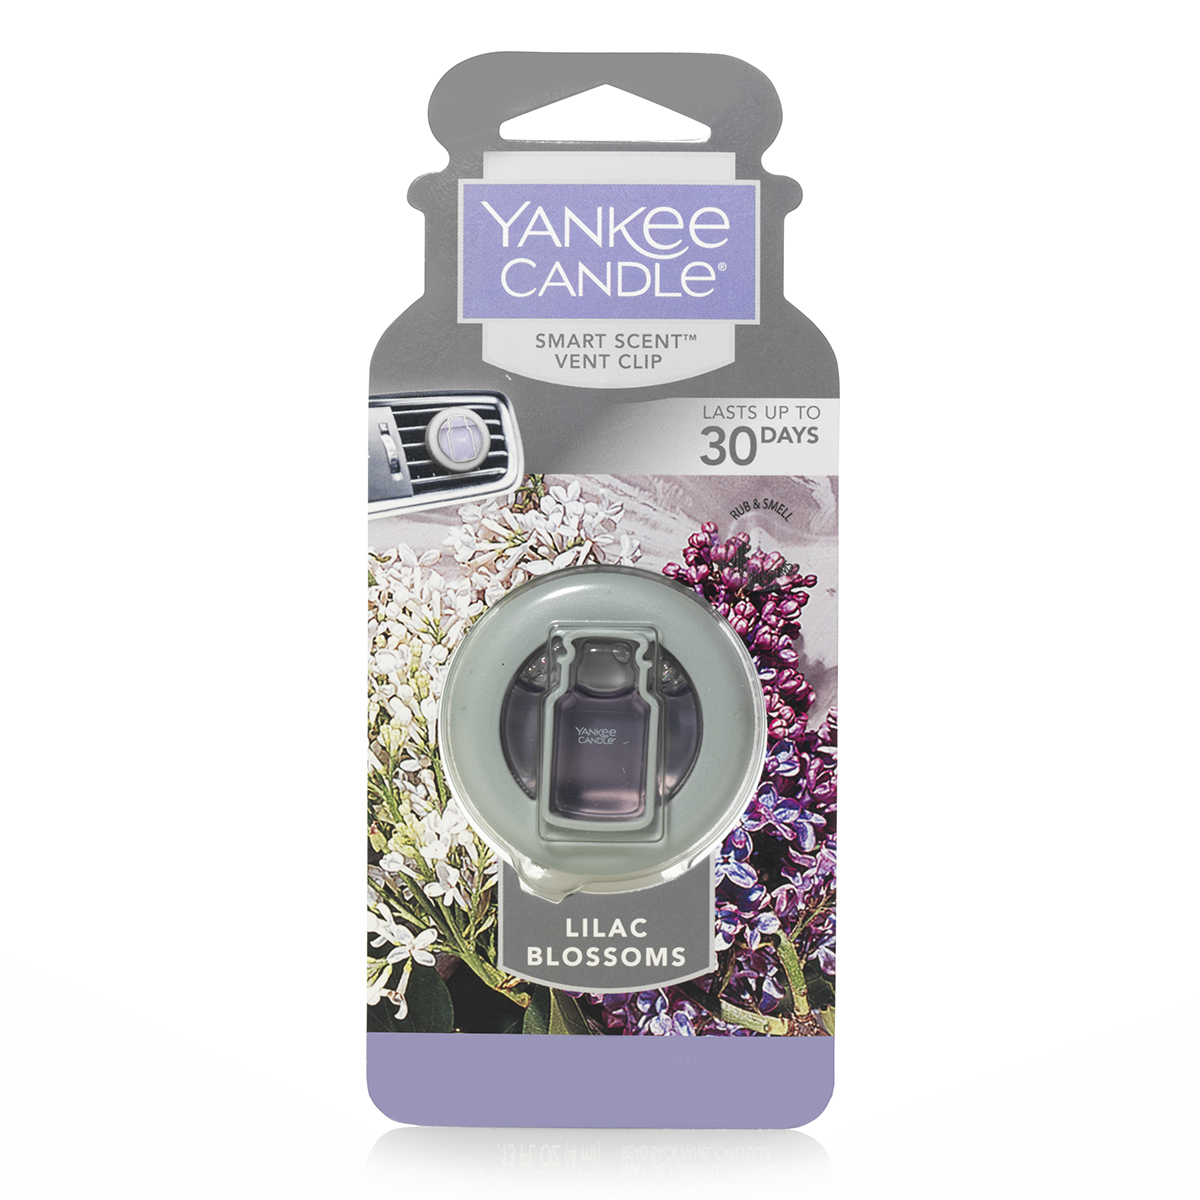 Yankee Candle(R) Lilac Blossom Smart Scent(tm) Vent Clip